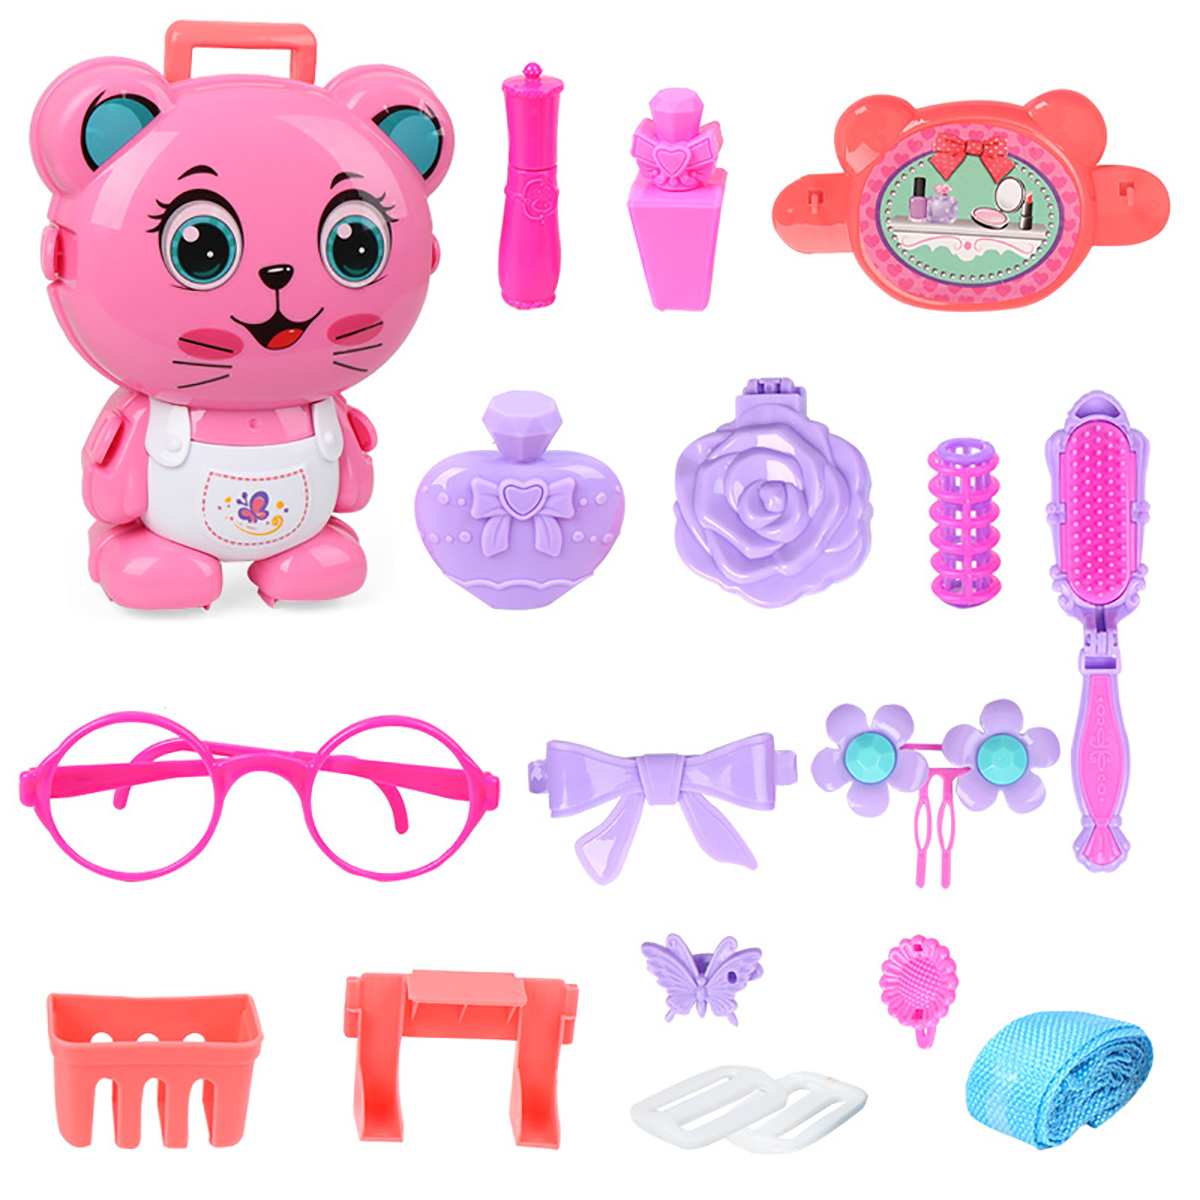 Simulation-Kids-Kitchen-Cooking-Tools-Doctors-Makeup-Playing-Education-Pretend-Toy-Set-with-Carrying-1725293-10